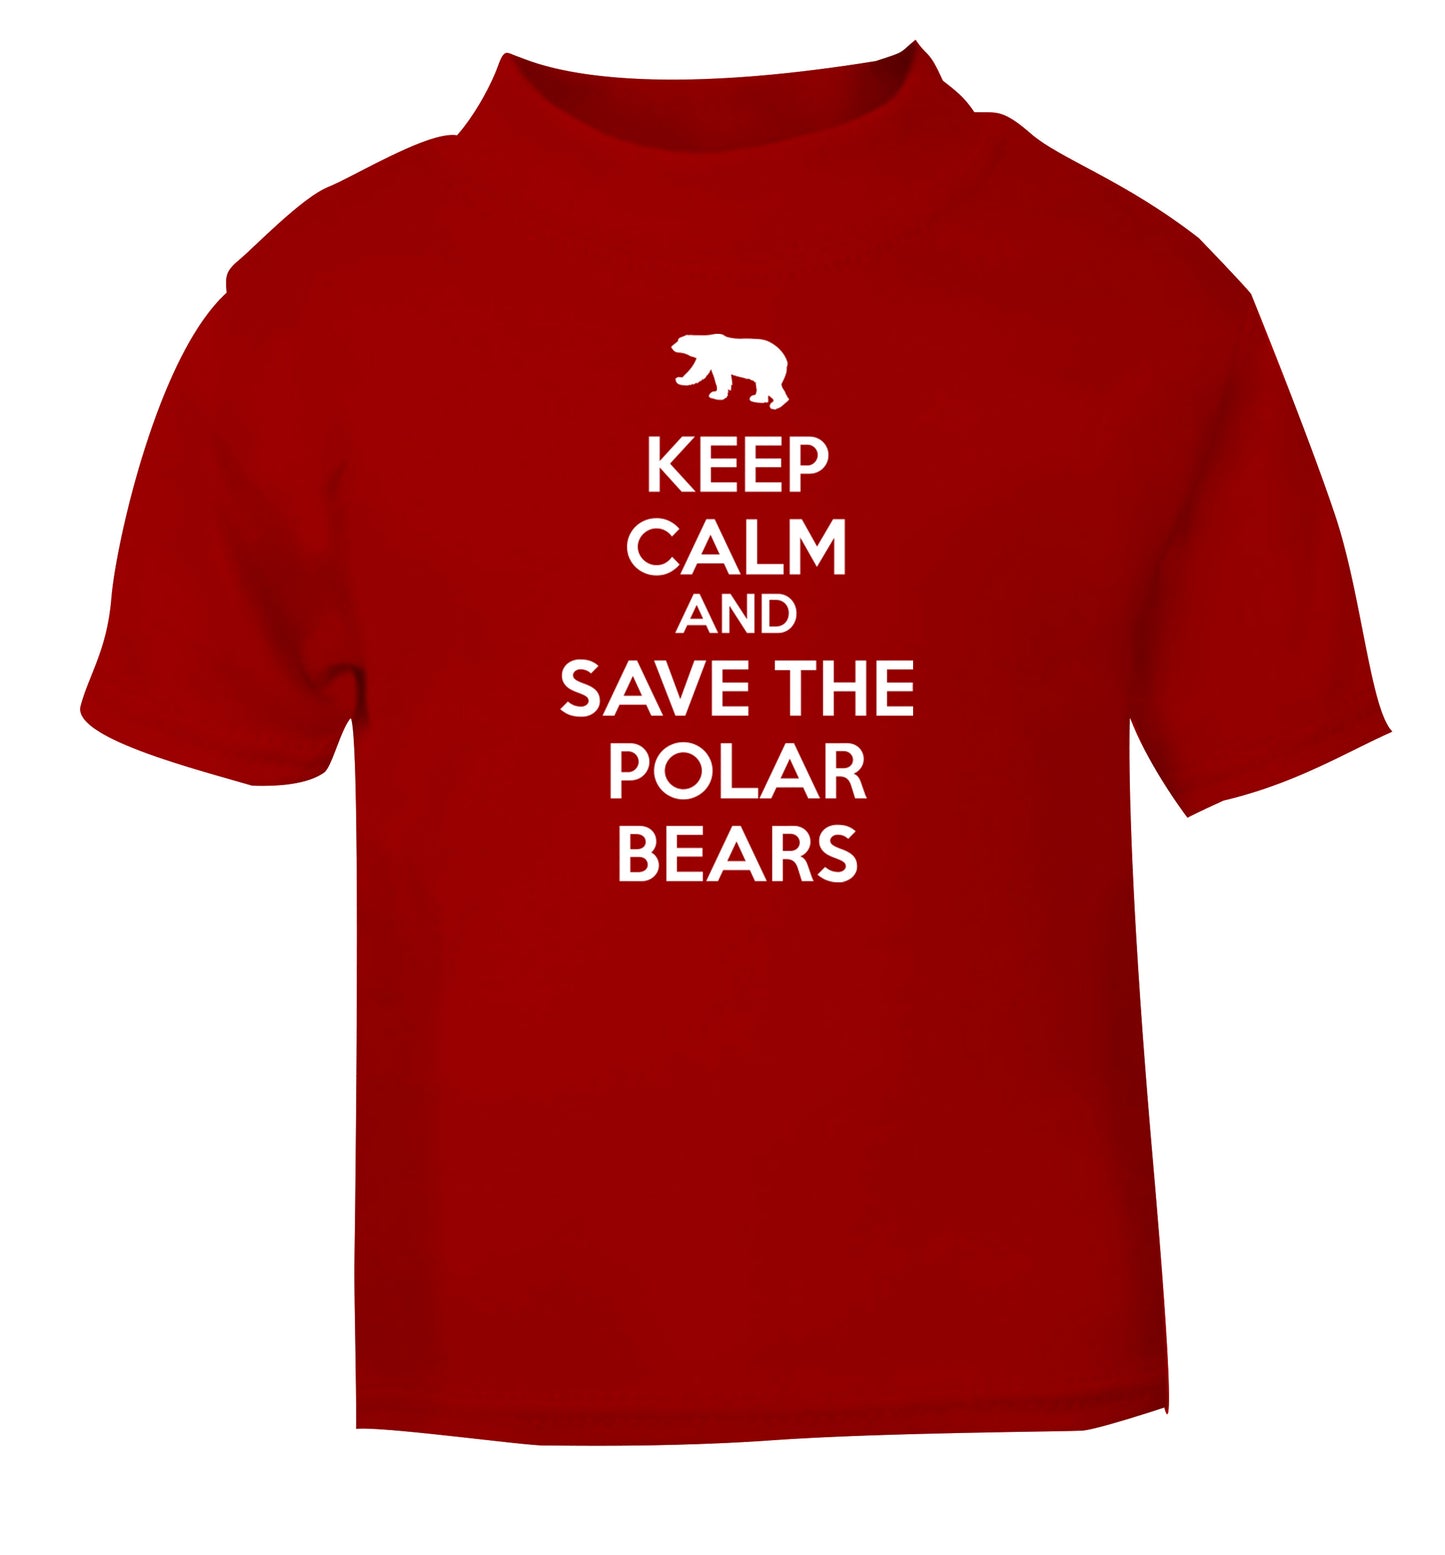 Keep calm and save the polar bears red Baby Toddler Tshirt 2 Years